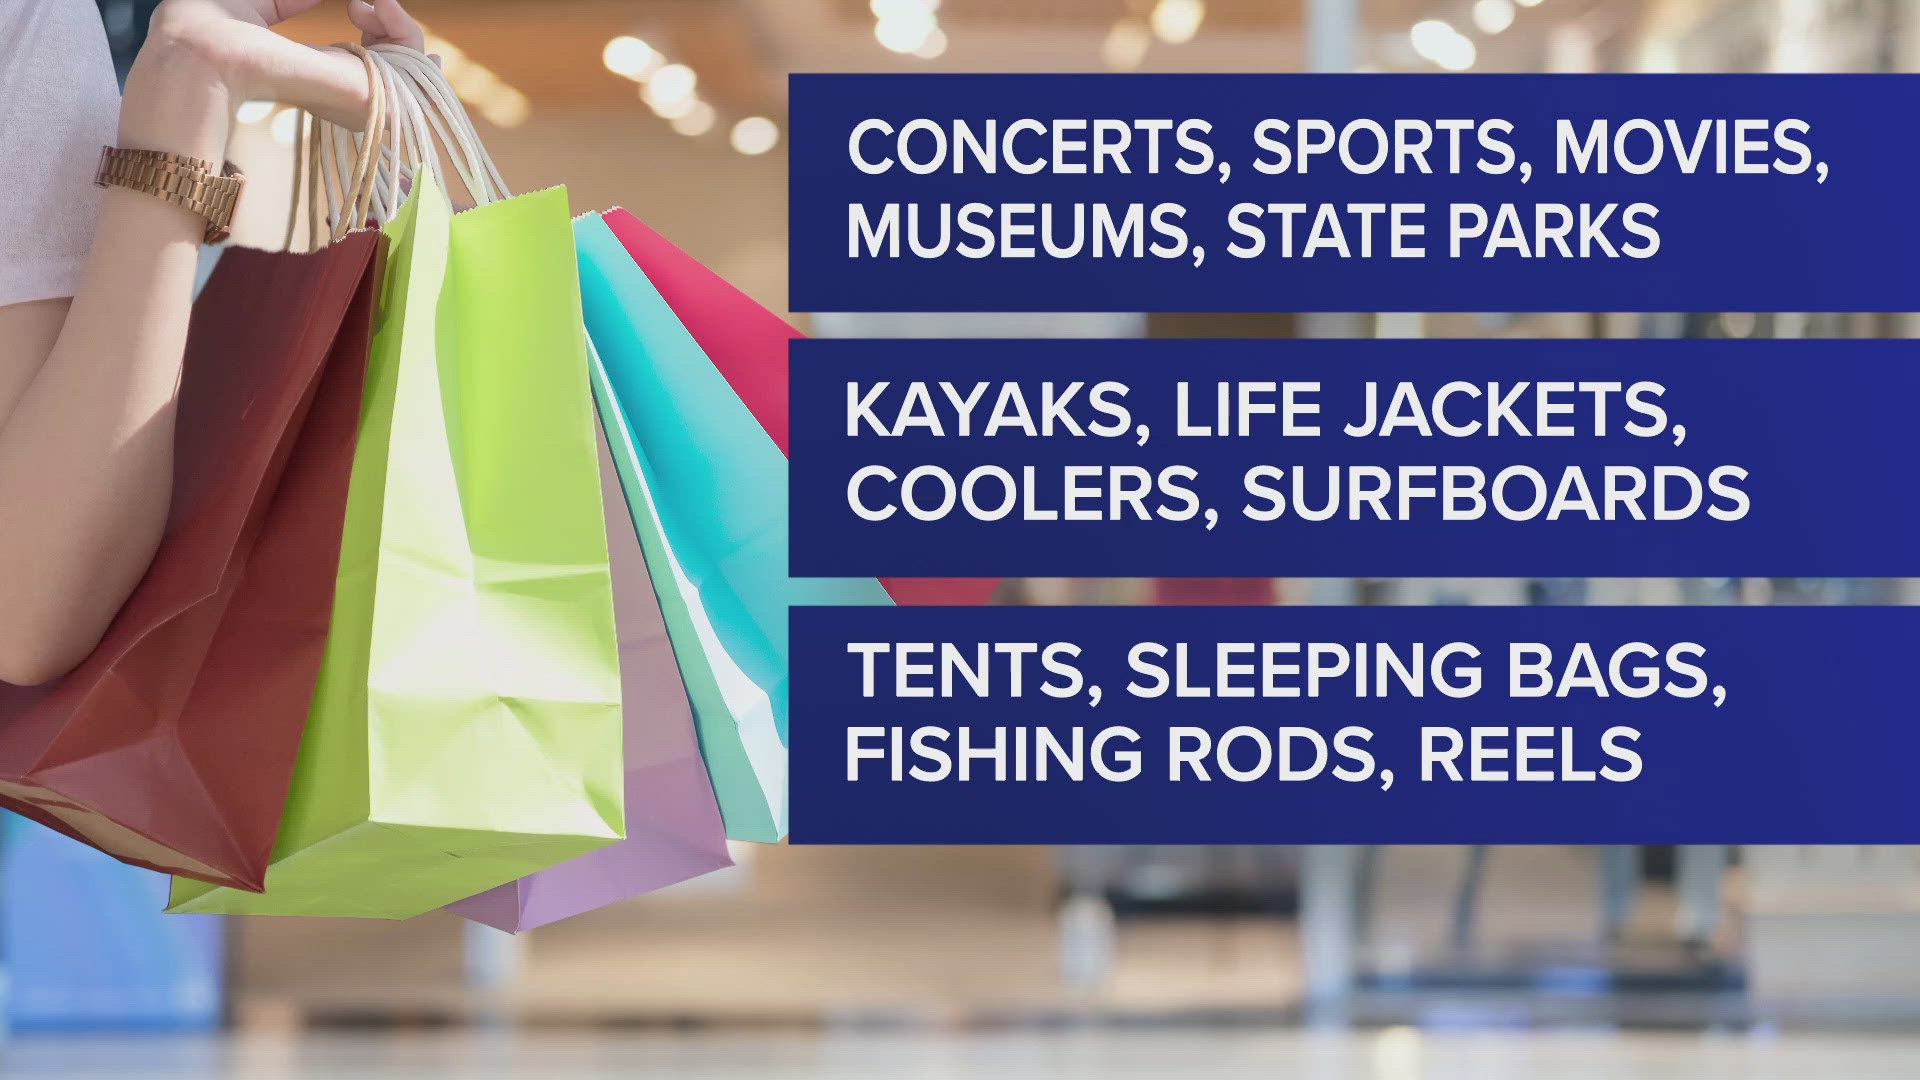 Recreational activity products, including kayaks and live music events, are all included.